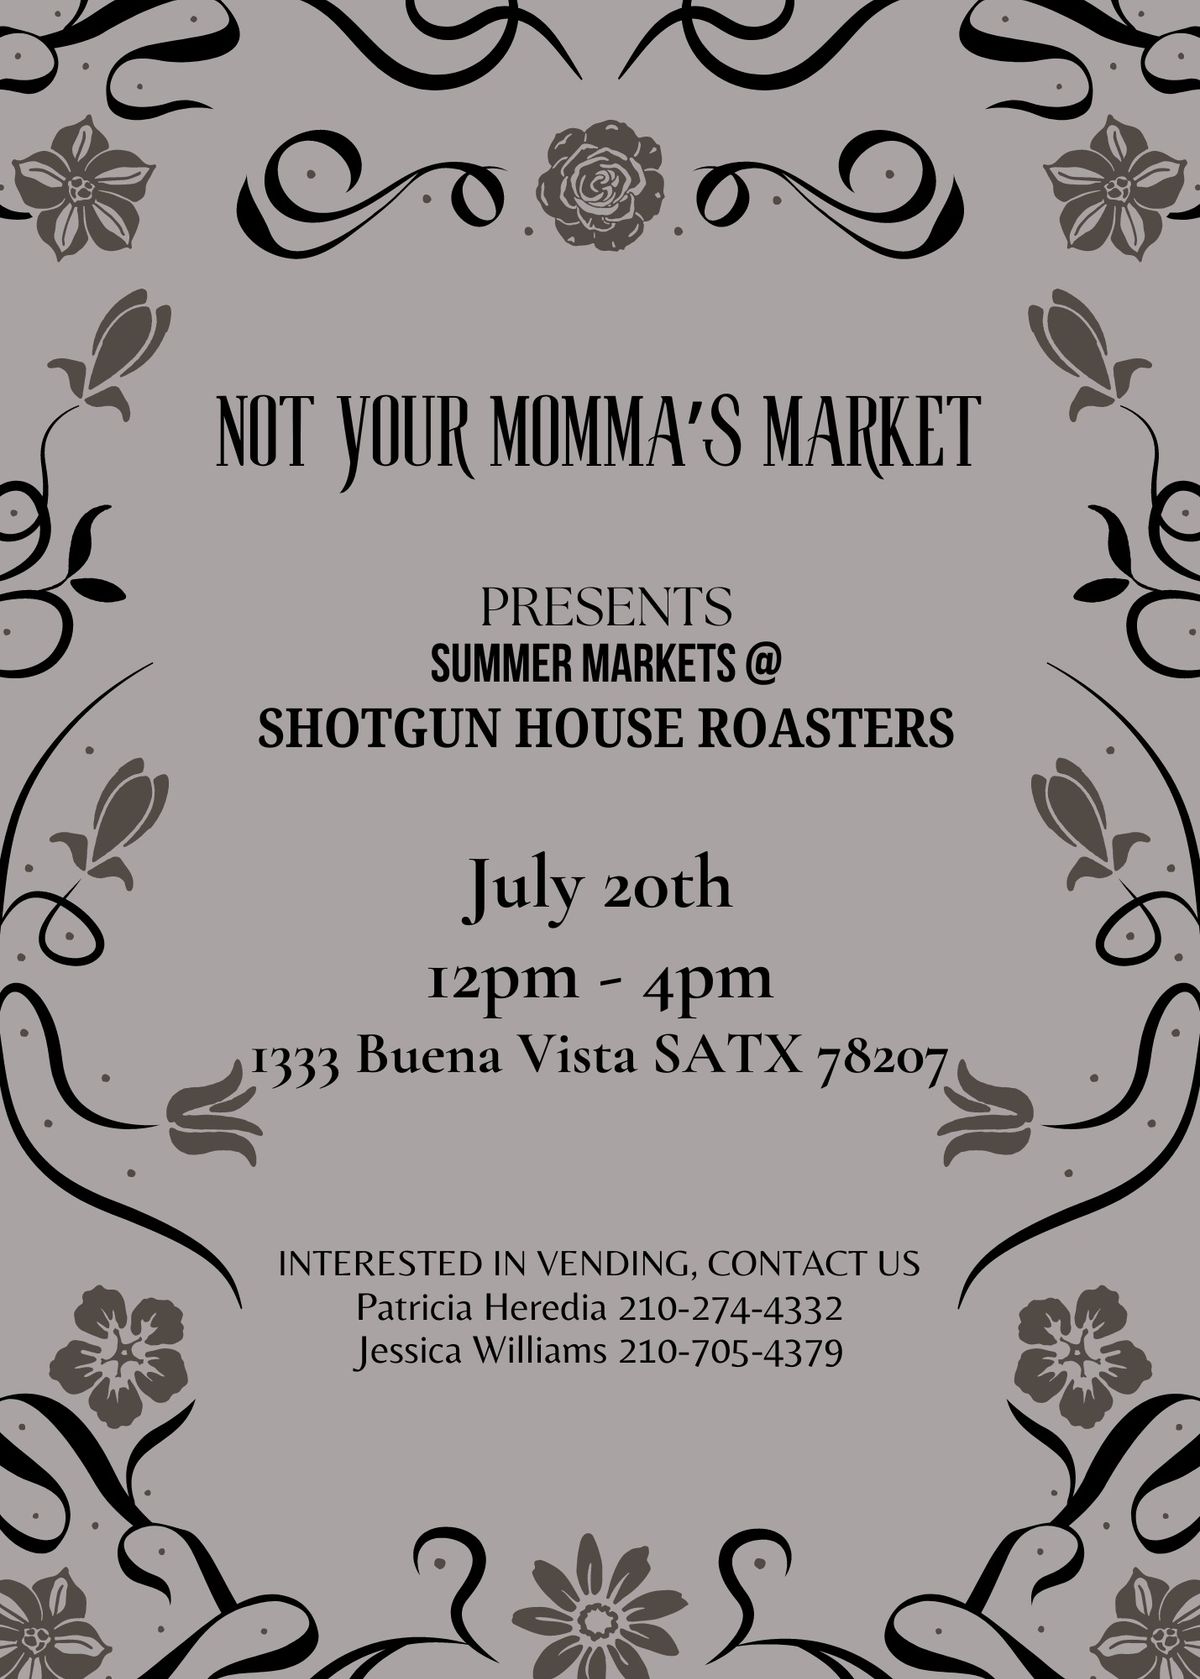 Summer Markets with Not Your Mommas Market